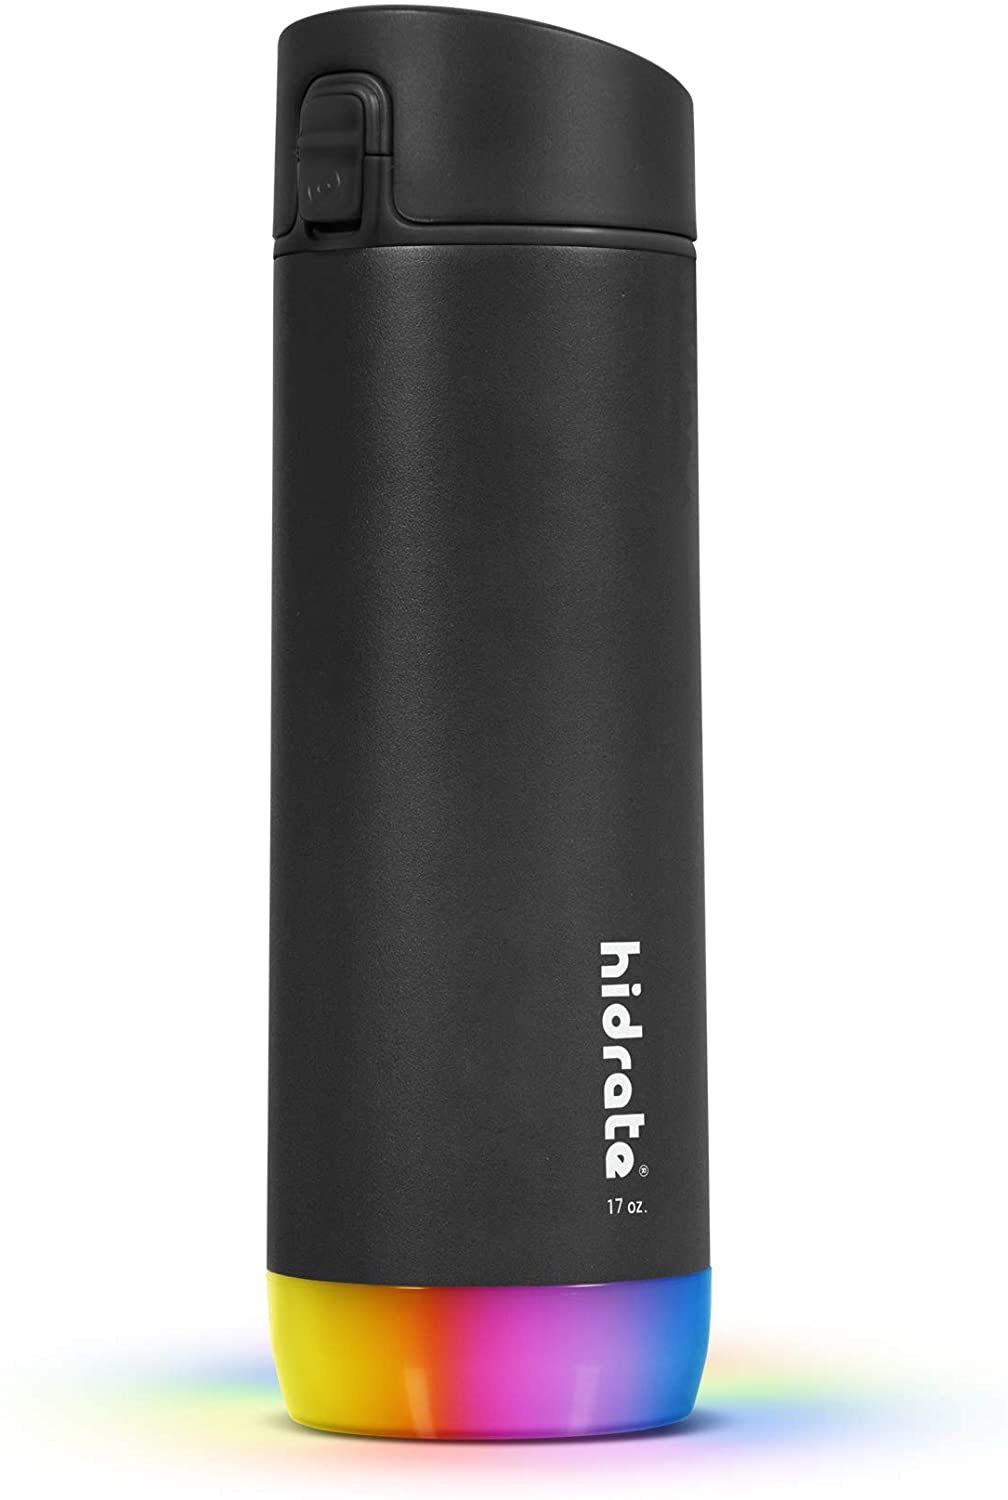 A black Hidrate Spark Pro smart water bottle standing upright with flashing colorful light